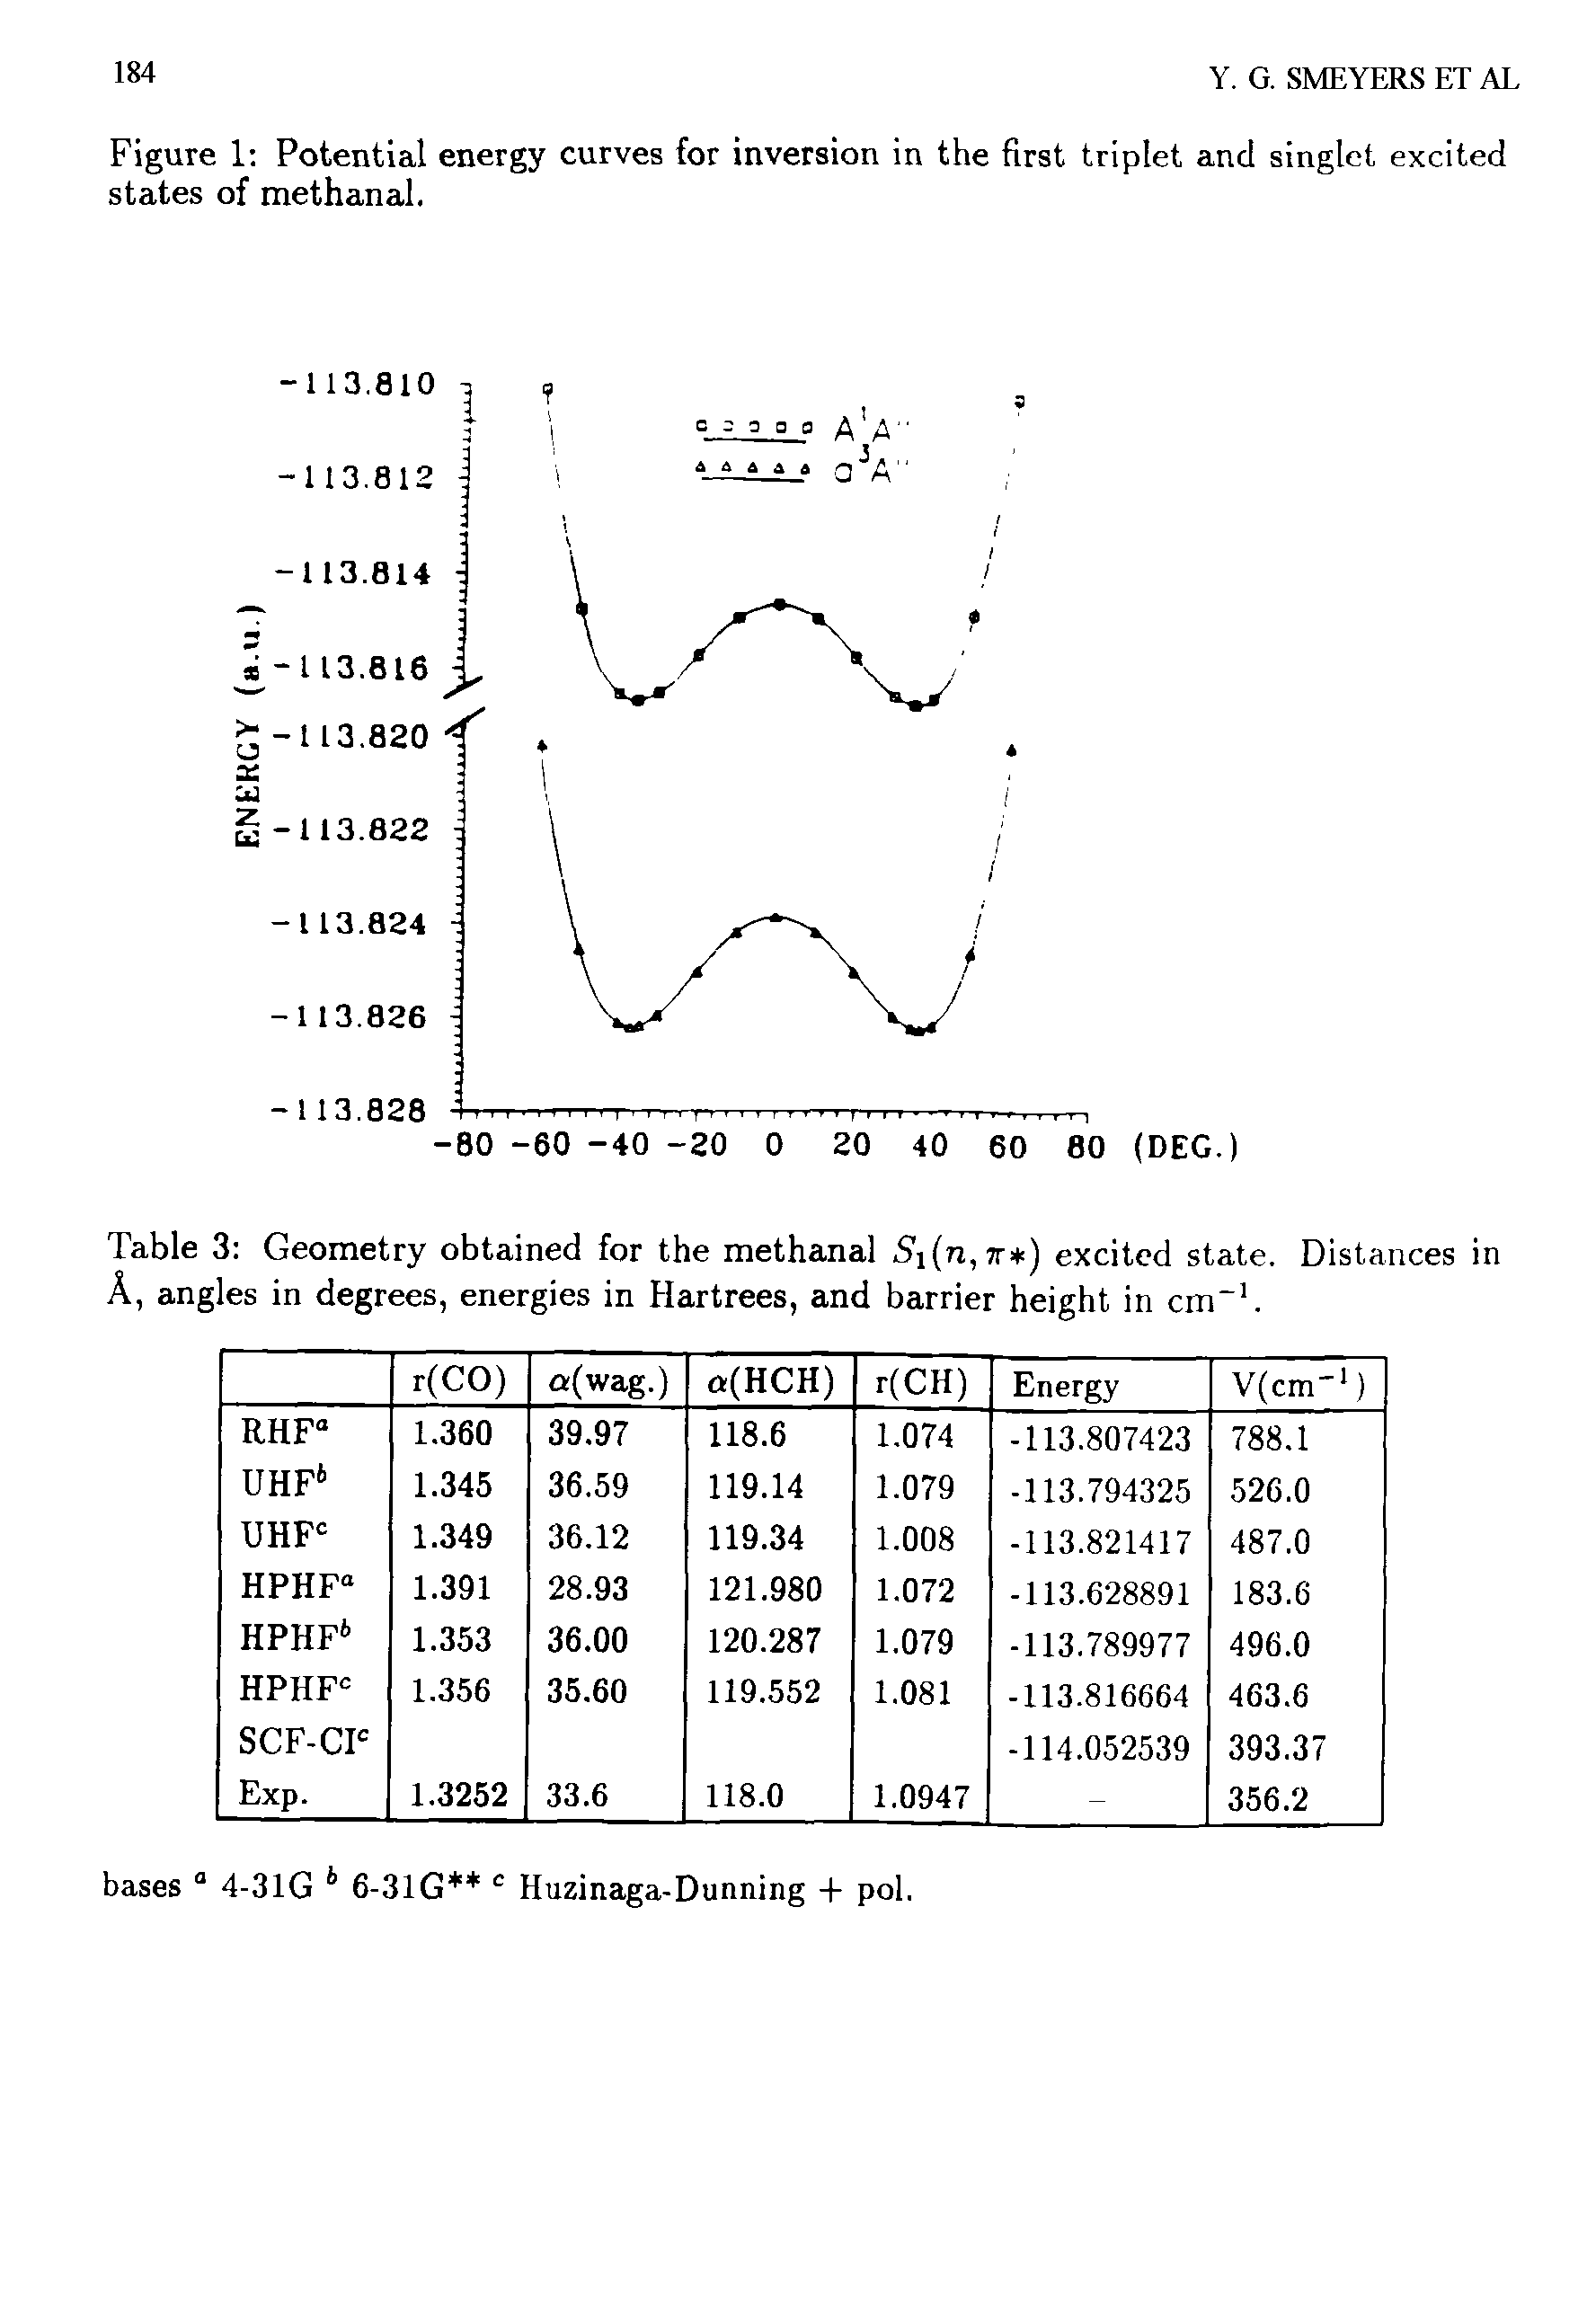 Table 3 Geometry obtained for the methanal Si(n,n ) excited state. Distances in A, angles in degrees, energies in Hartrees, and barrier height in cm . ...